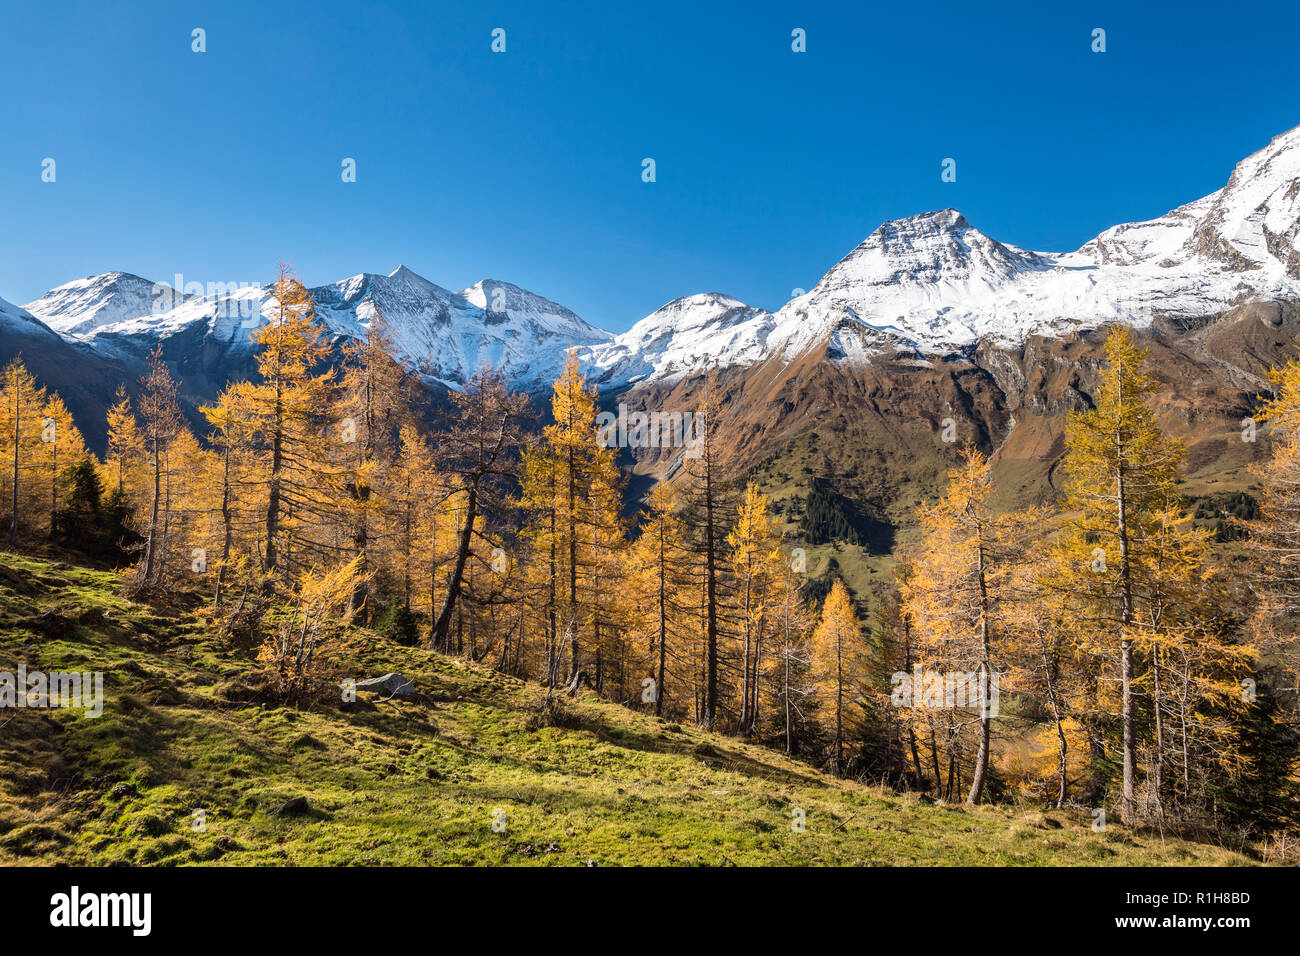 Autumnal larches in front of snow-covered mountain peaks, Großglockner High Alpine Road, Brennkogel, Hohe Dock Stock Photo